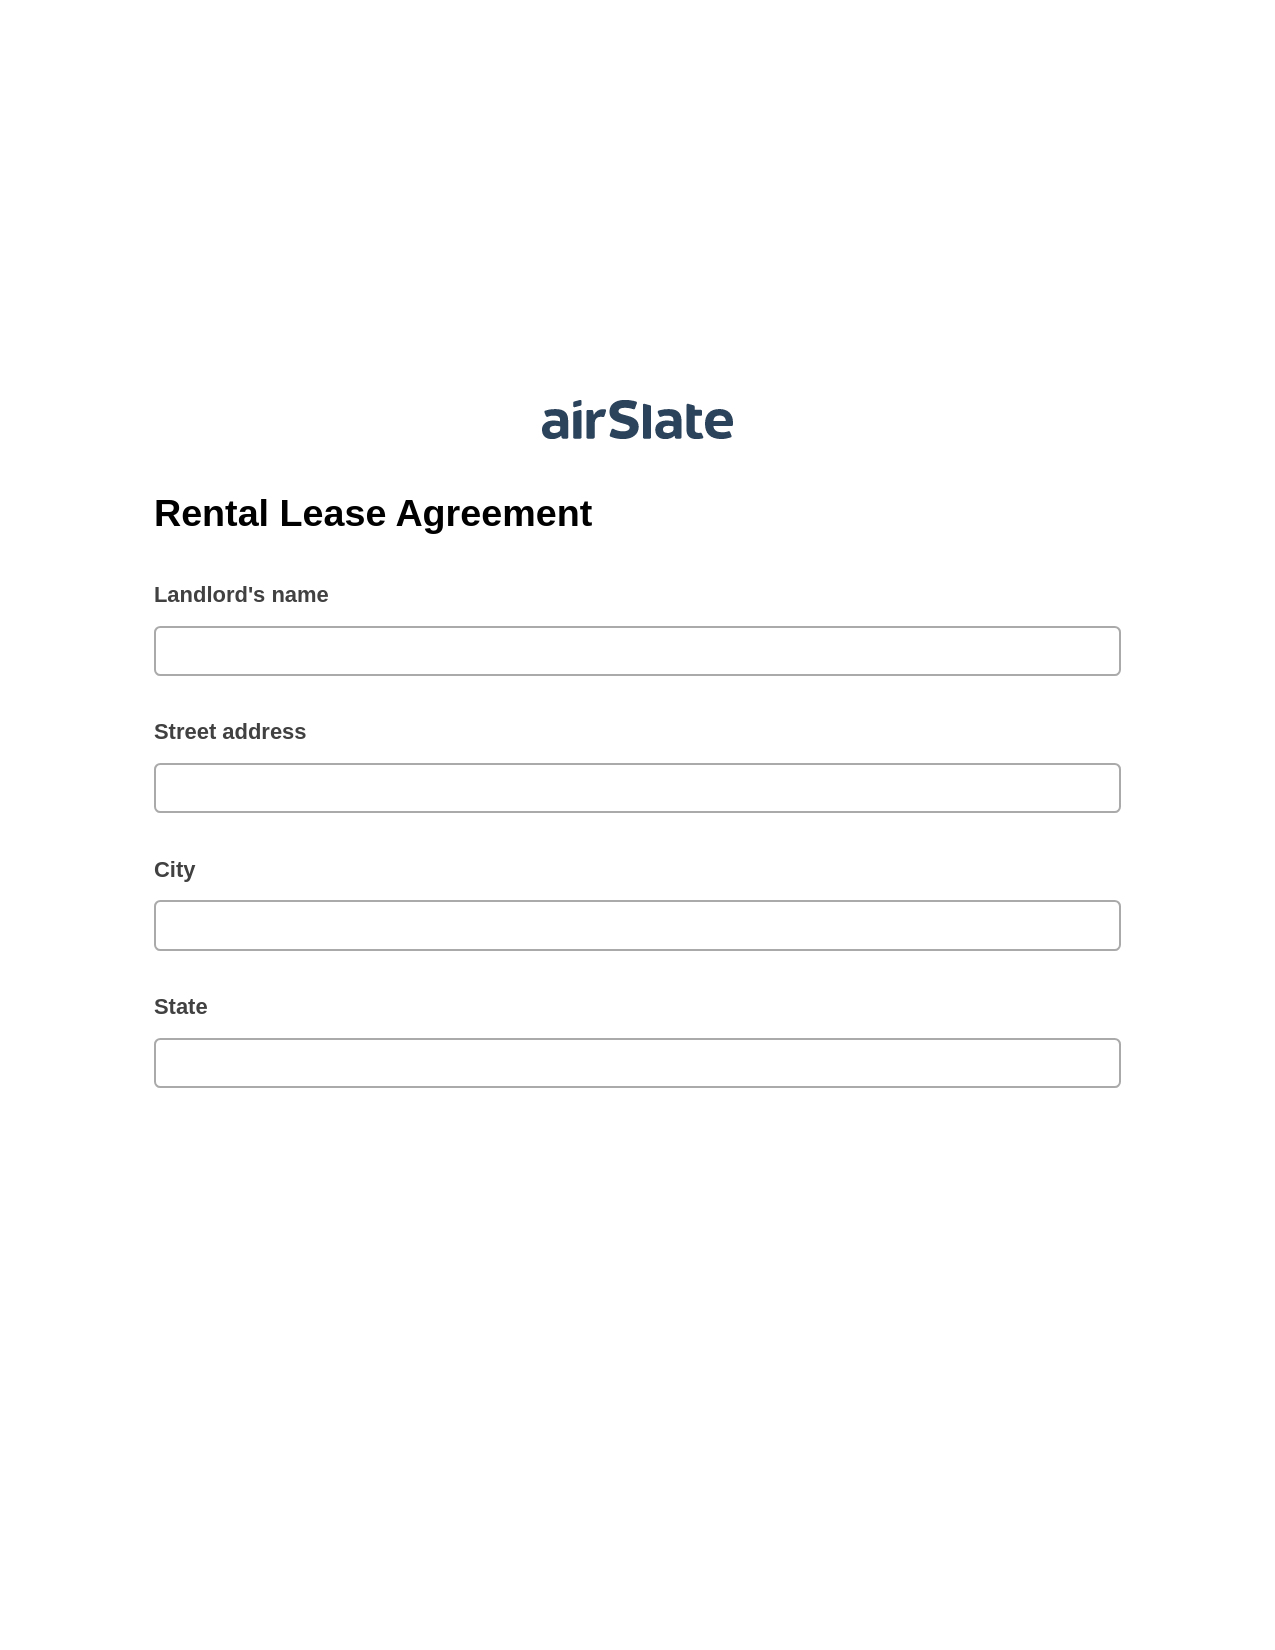 Rental Lease Agreement Pre-fill from Google Sheet Dropdown Options Bot, System Bot - Create a Slate in another Flow, Slack Two-Way Binding Bot